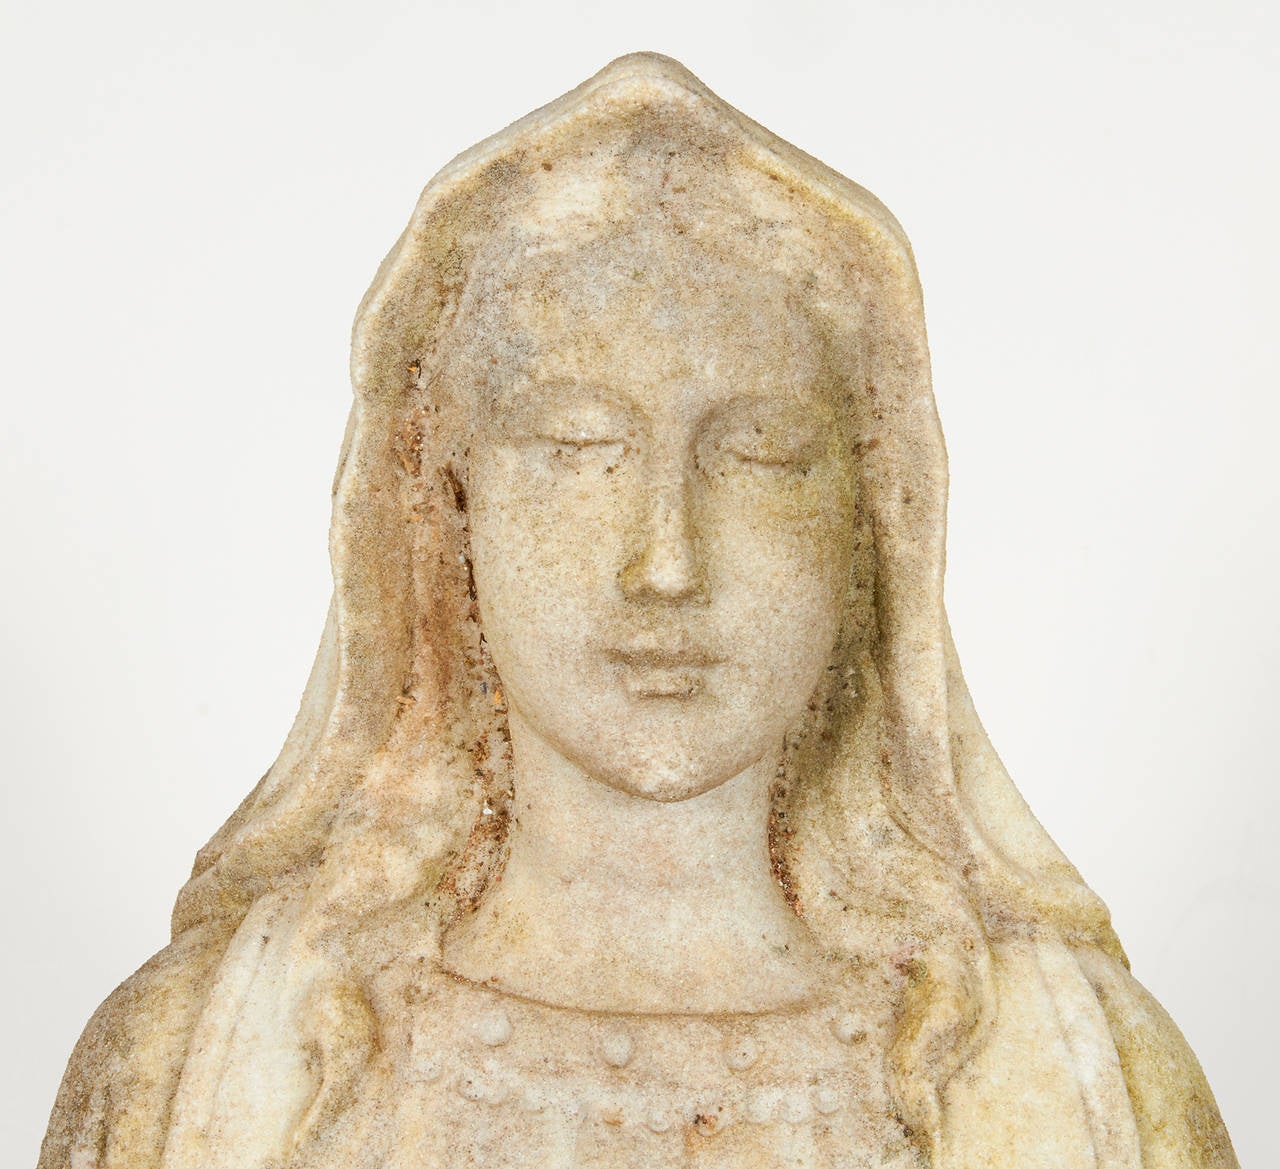 Fabulous hand-carved figure of Mary in aged patina of white marble.
Incredible detail of face, hands and robes with arms spread.